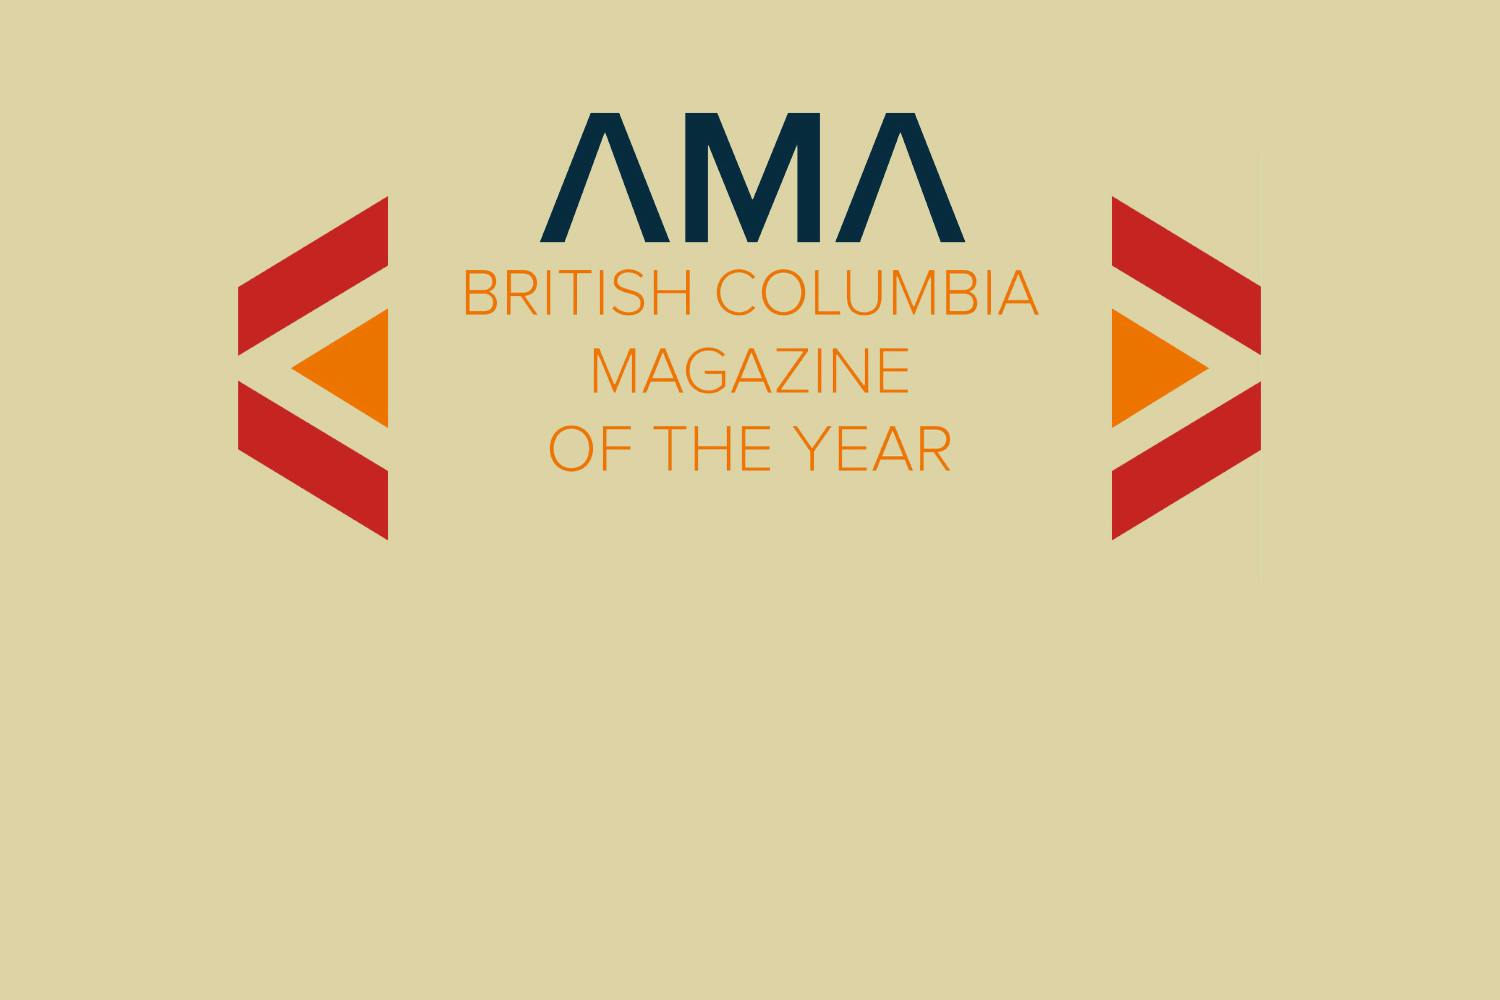 Key text: "AMA British Columbia Magazine of the Year" between two red arrows pointing left and right, on a beige background.